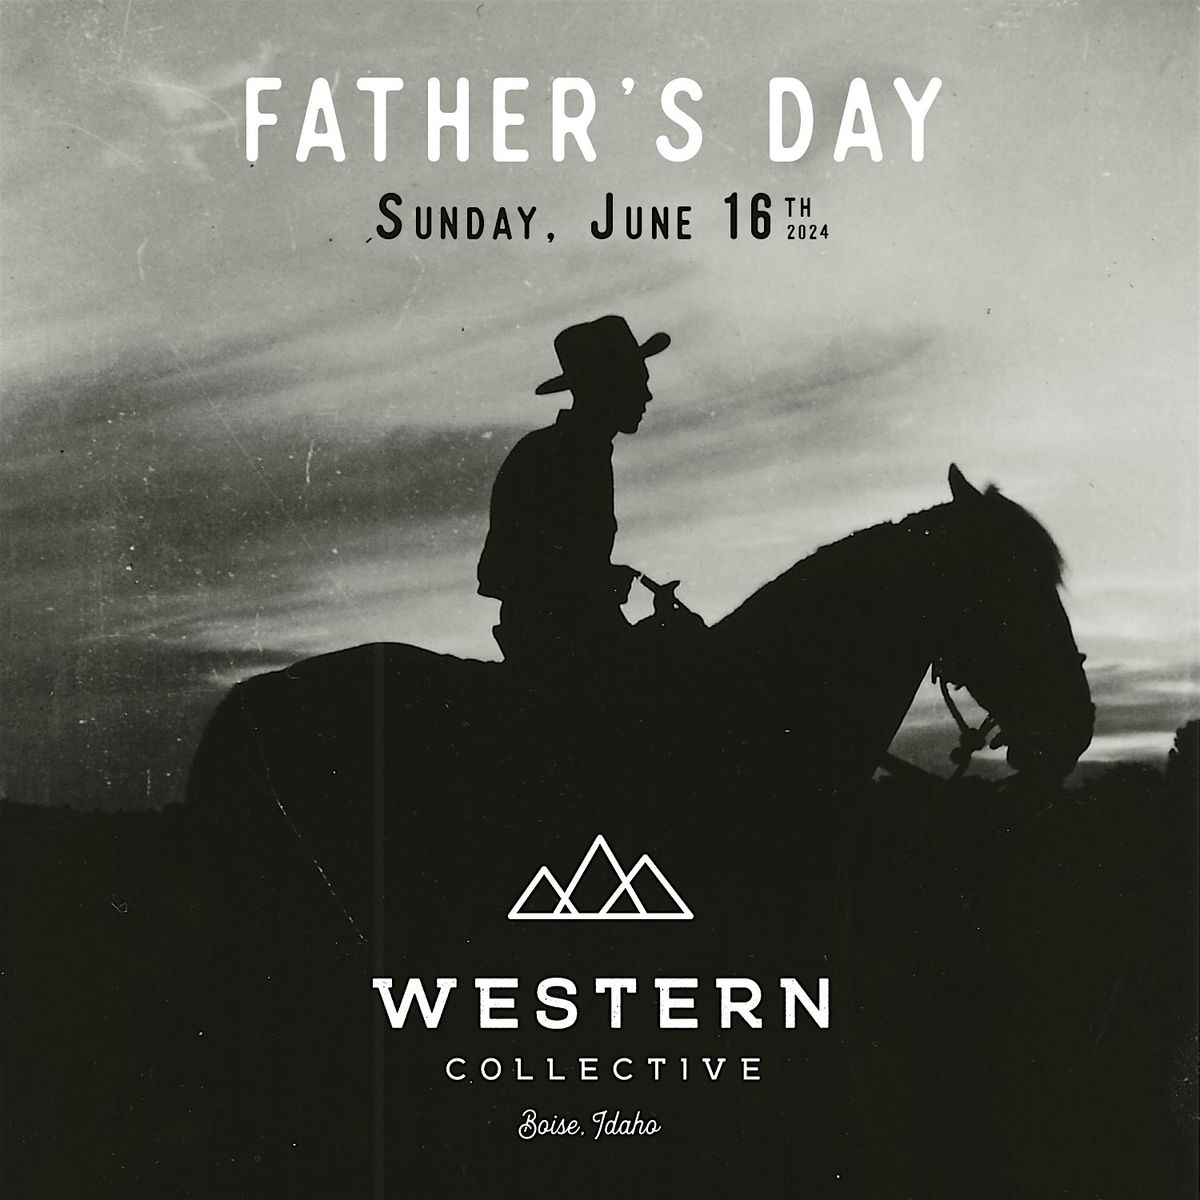 Western Collective & TO Entertain U present: CASH'D OUT on Father's Day